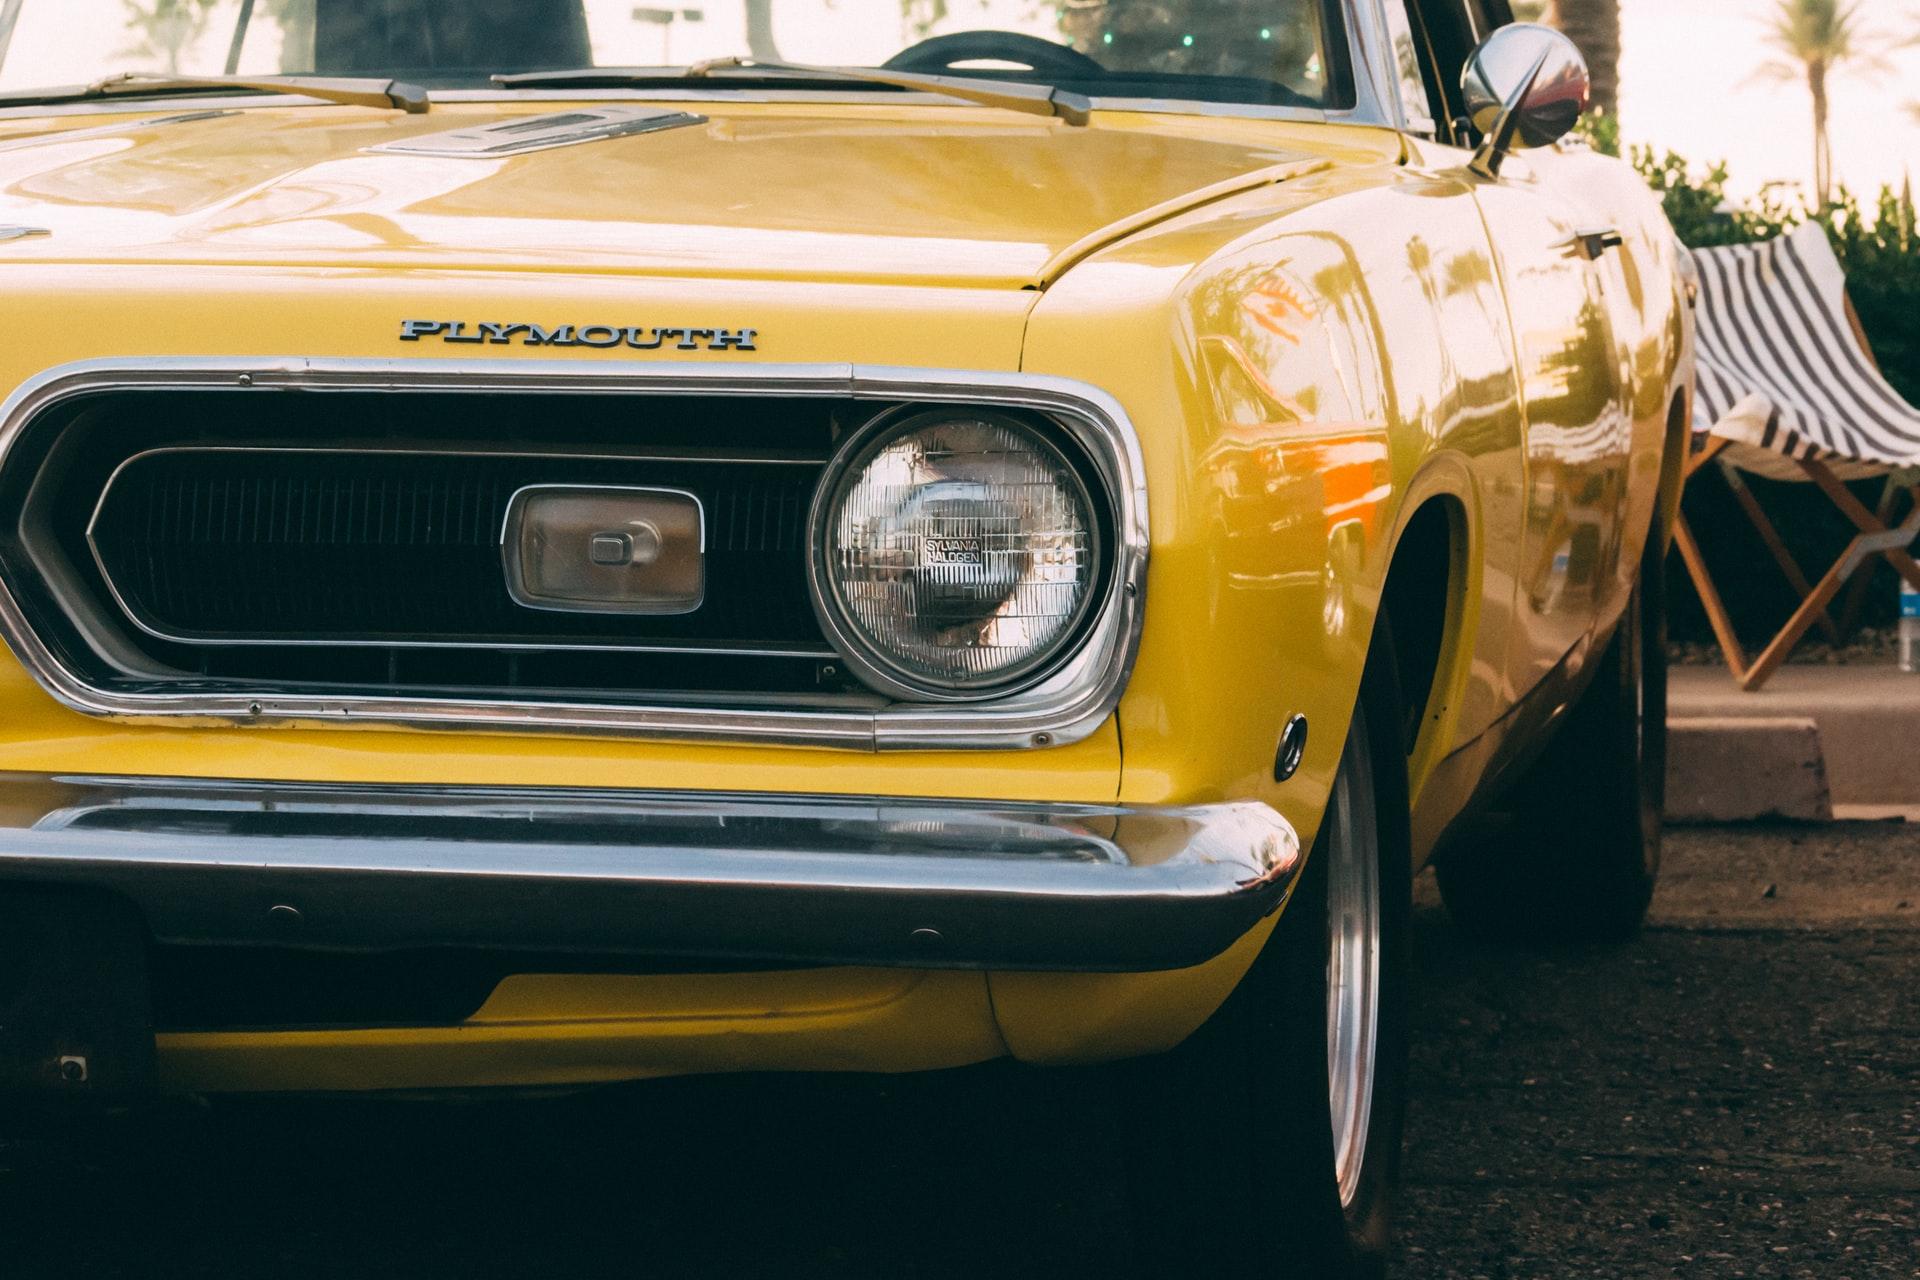 The Plymouth Barracuda flew under the shadow of the Mustang in the ‘70s.